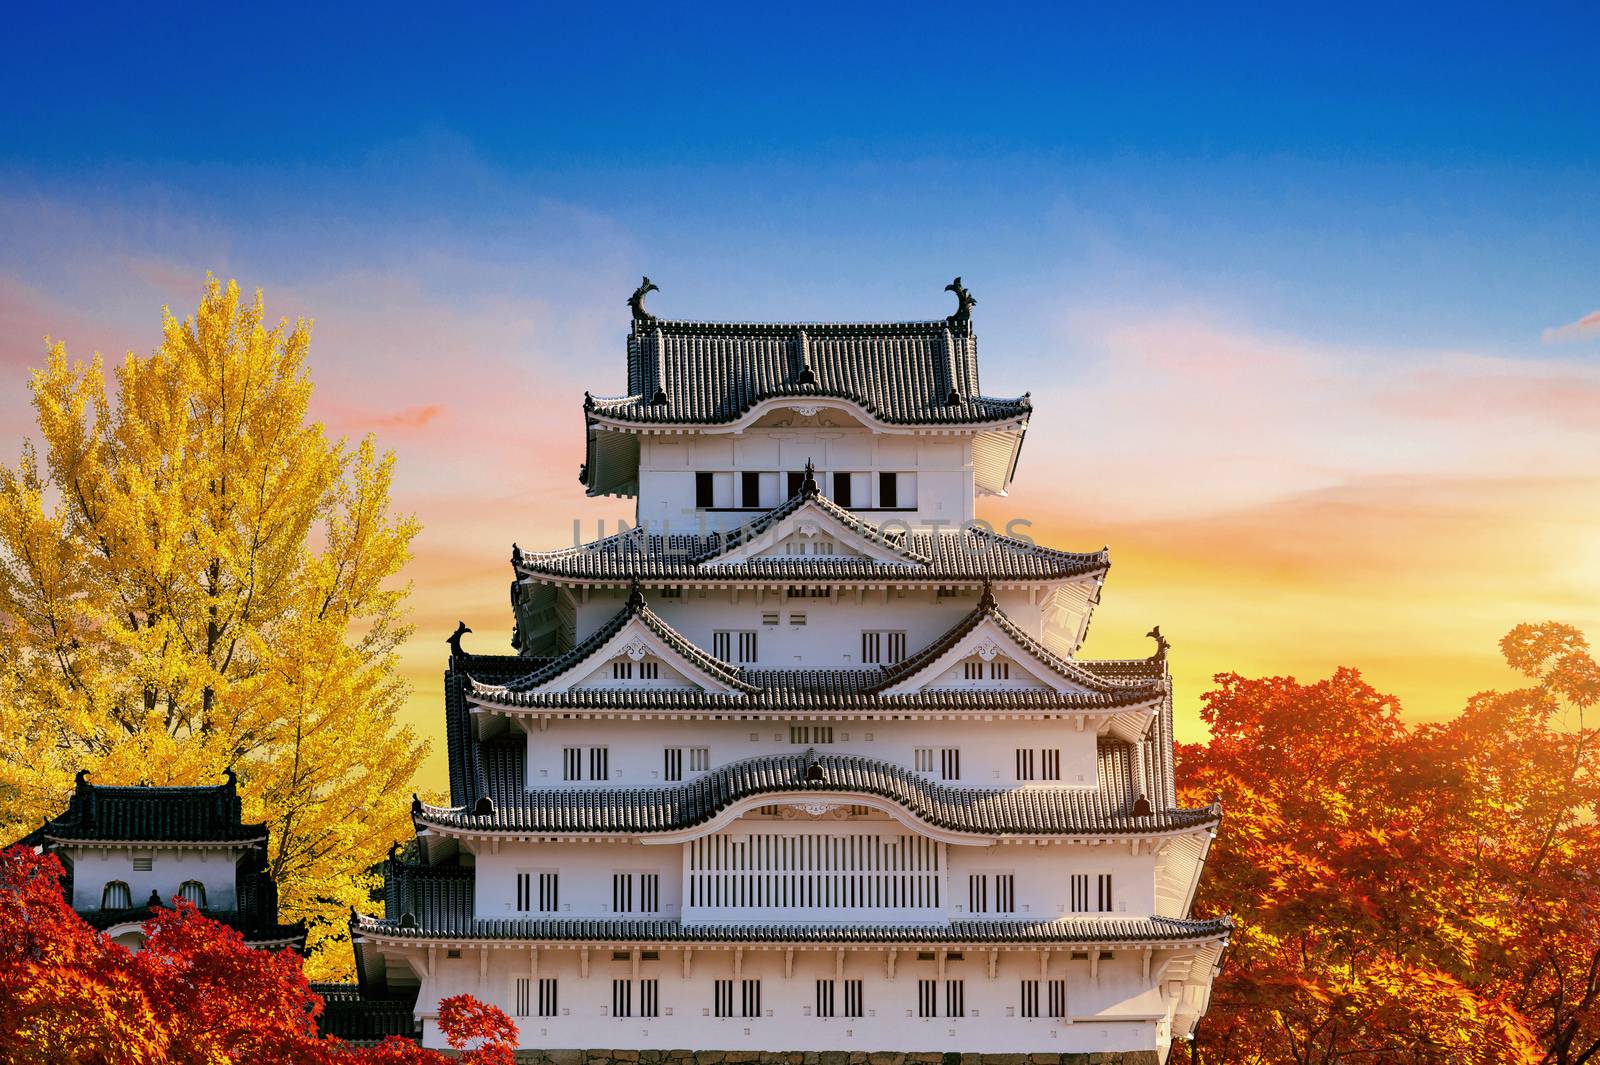 Autumn Season and castle in Himeji, Japan by gutarphotoghaphy